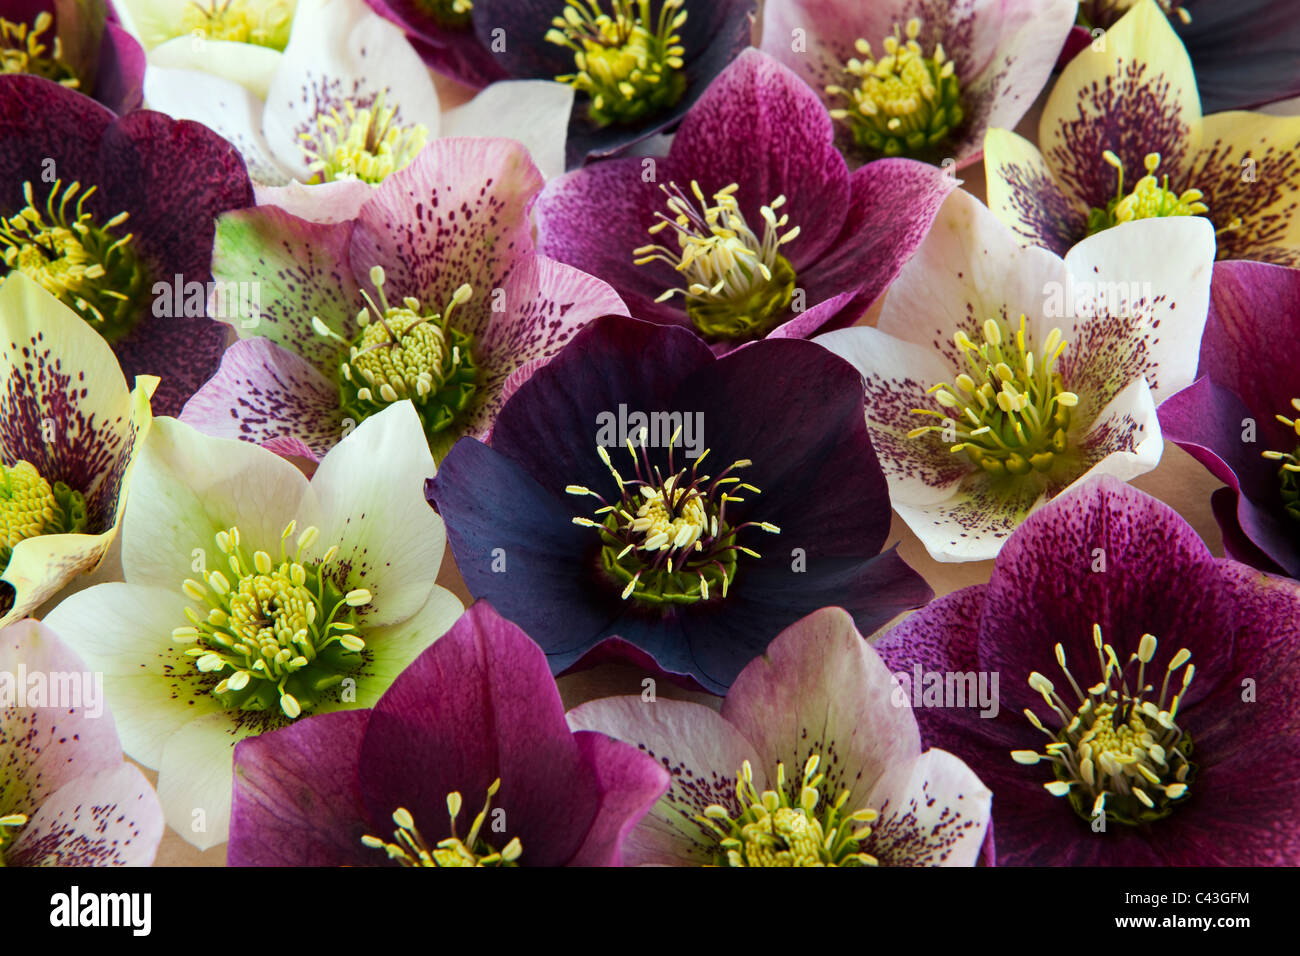 A selection of Hellebore flowers Stock Photo